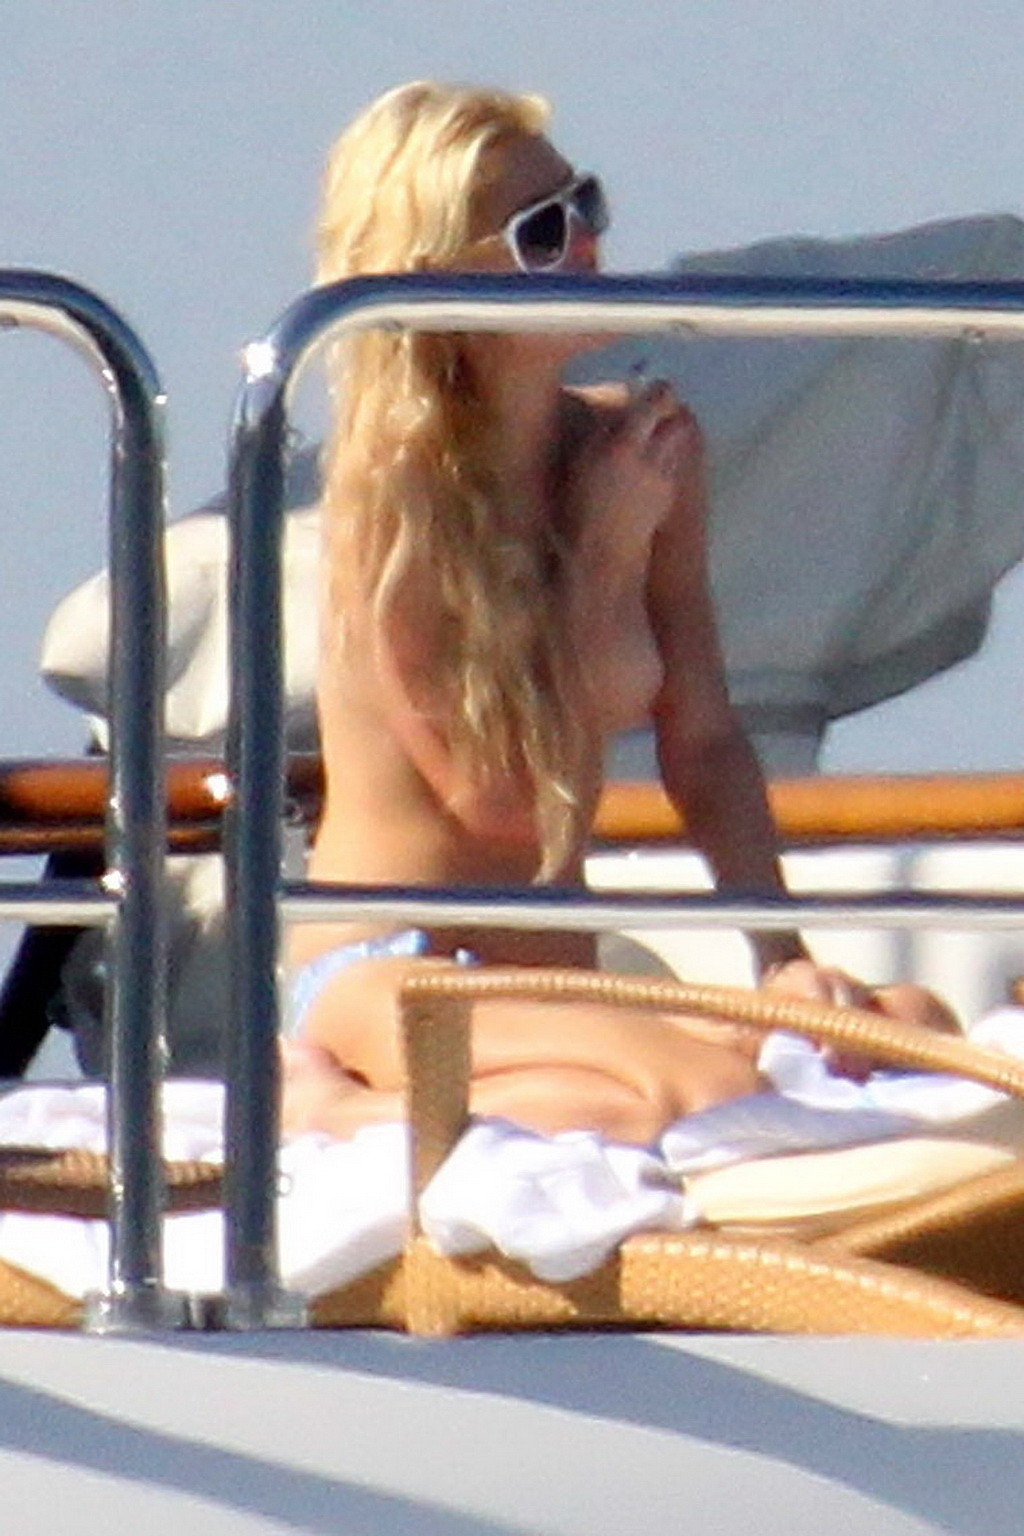 Paris Hilton topless showing off her small tits on a yacht in Italy #75340712